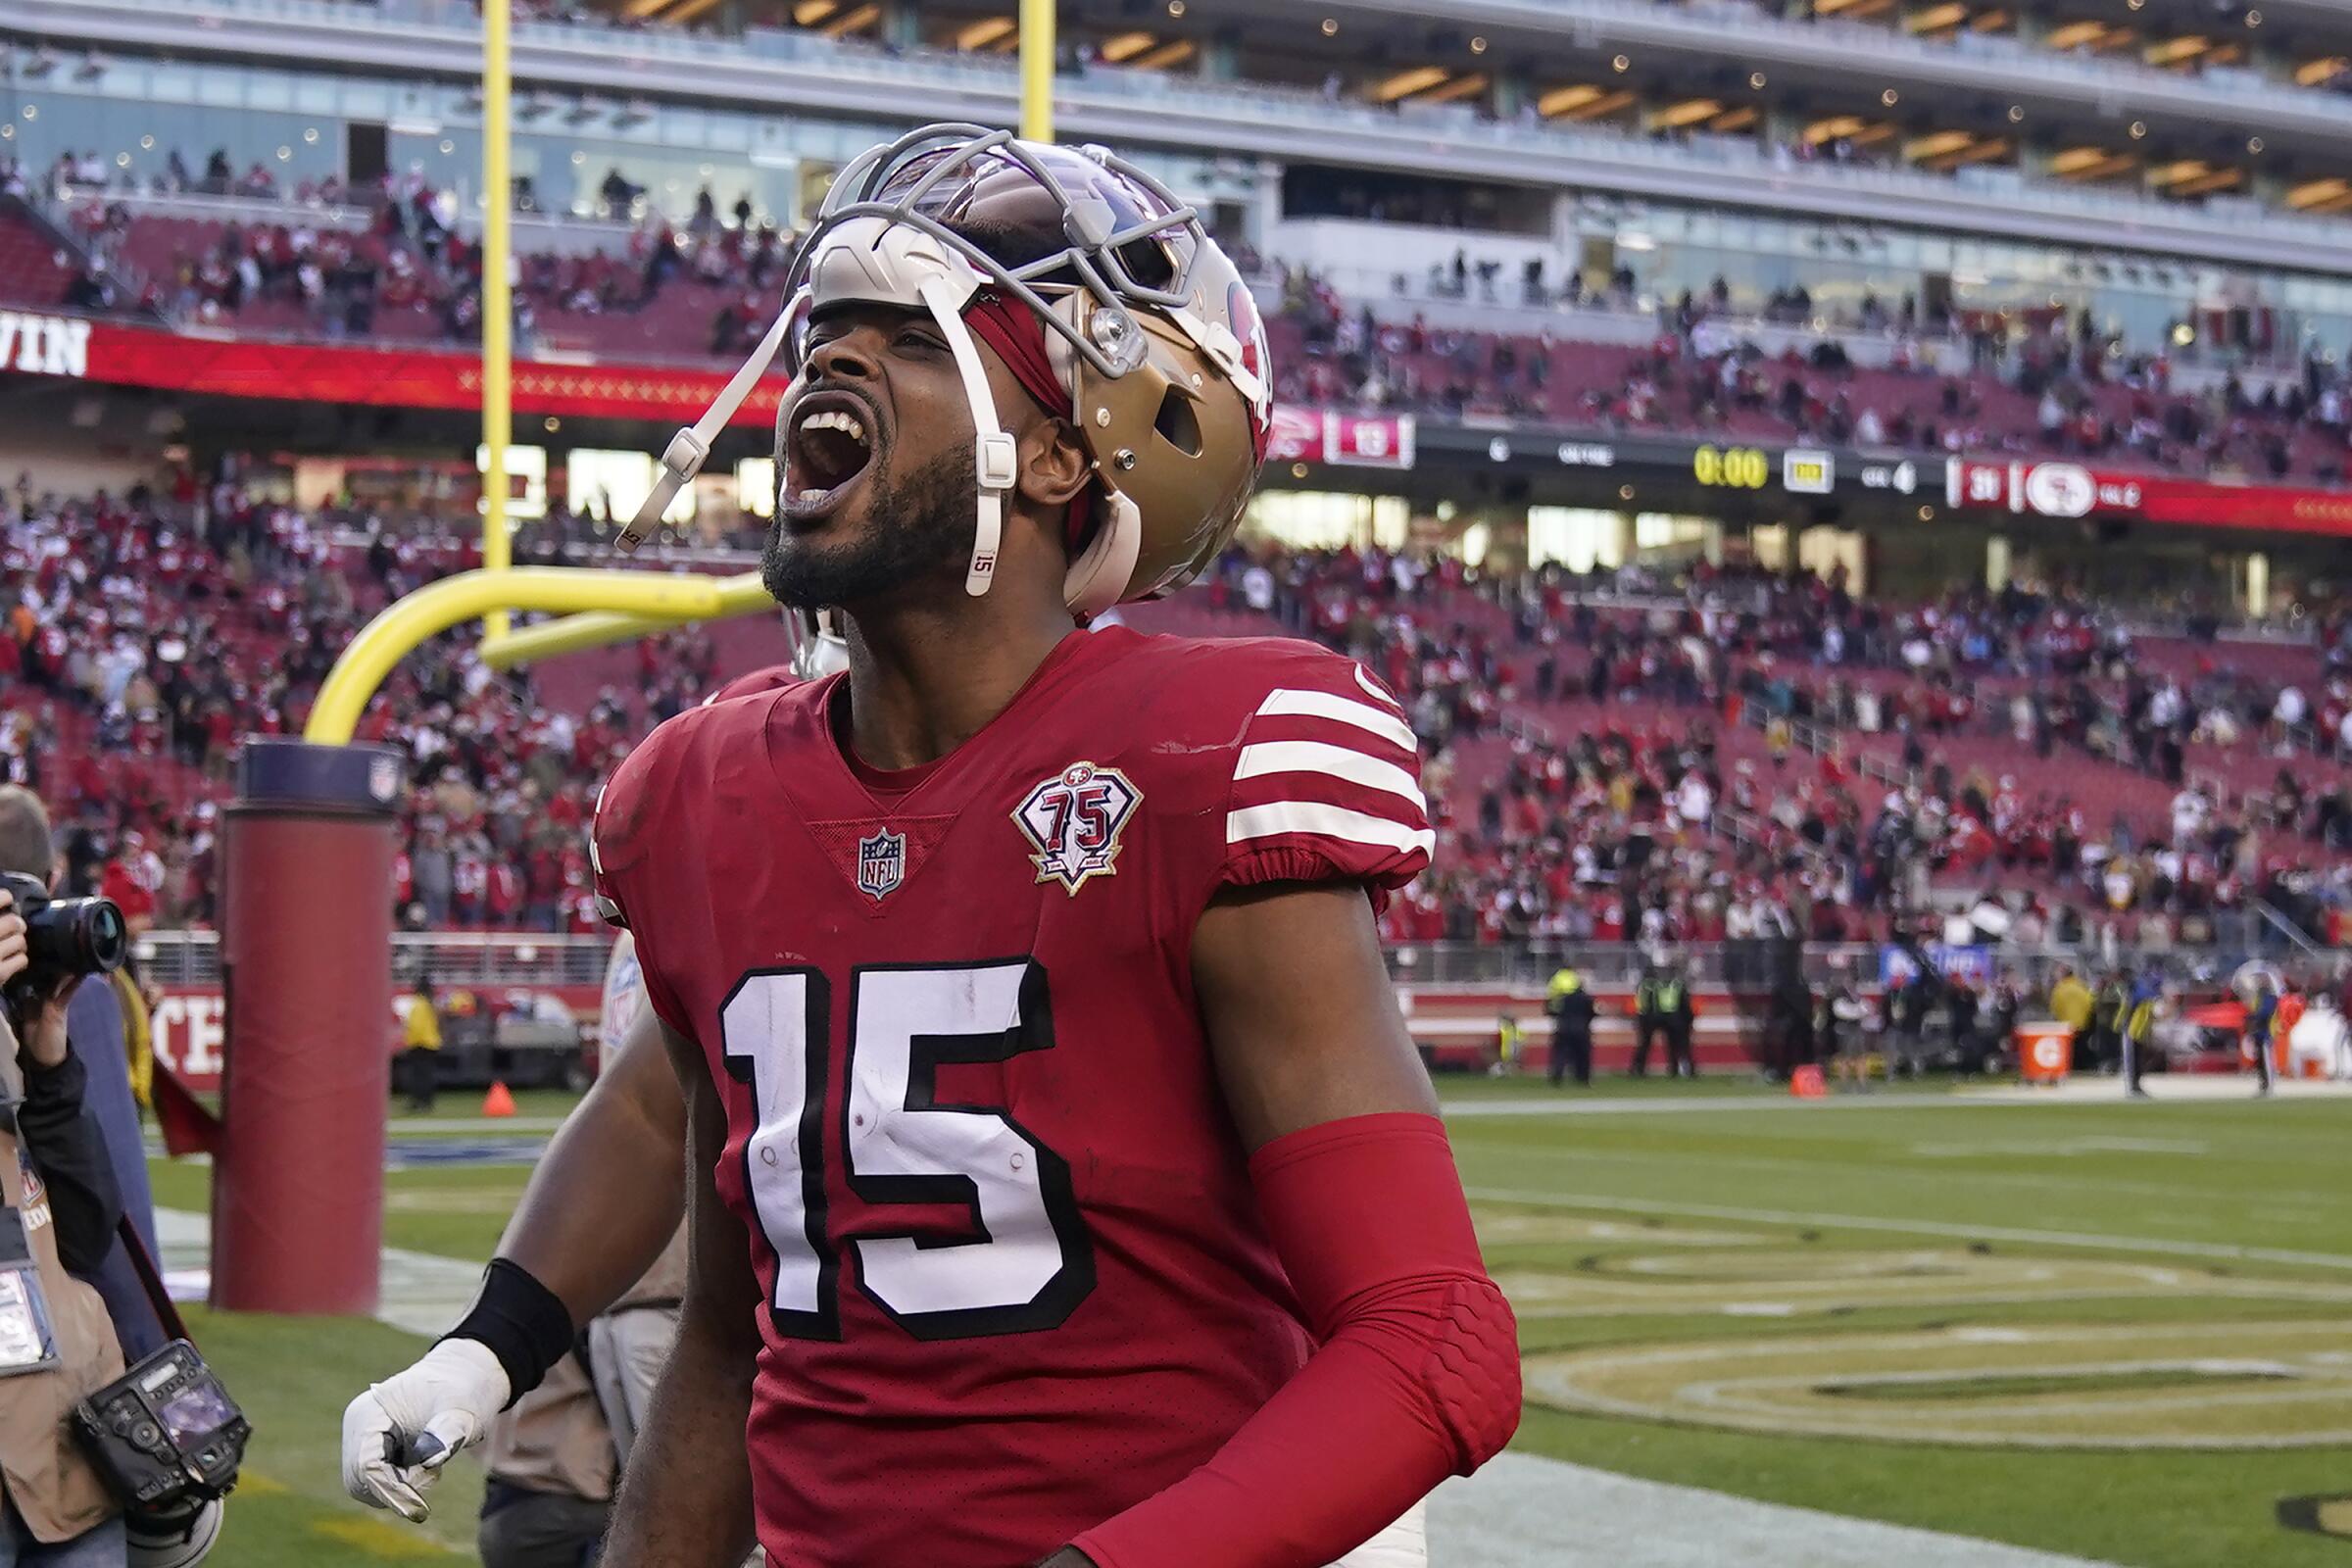 San Francisco 49ers wide receiver Jauan Jennings (15) celebrates toward fans after the 49ers' win over the Falcons.